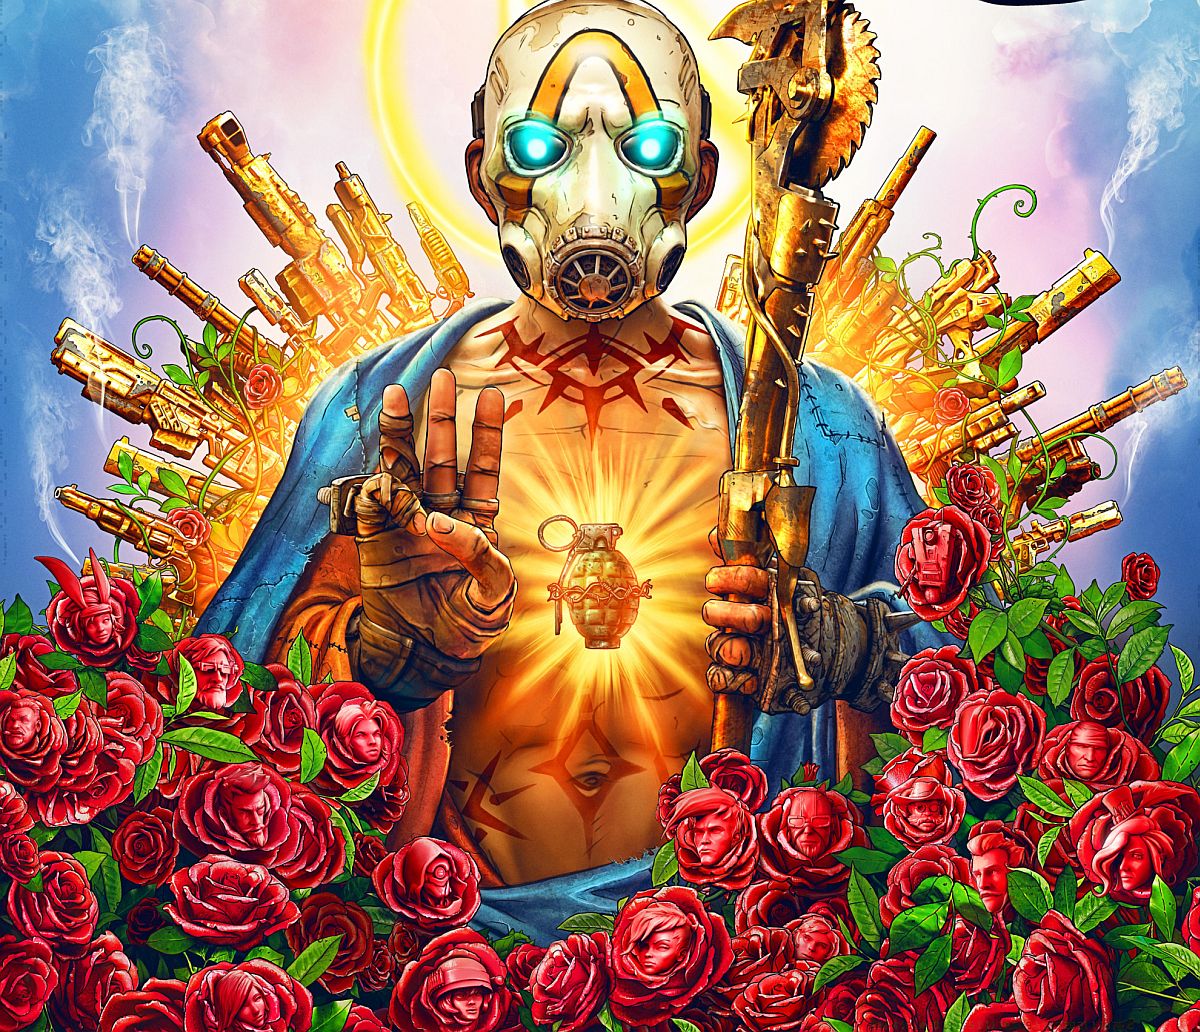 free for ios instal Borderlands 3: Ultimate Edition